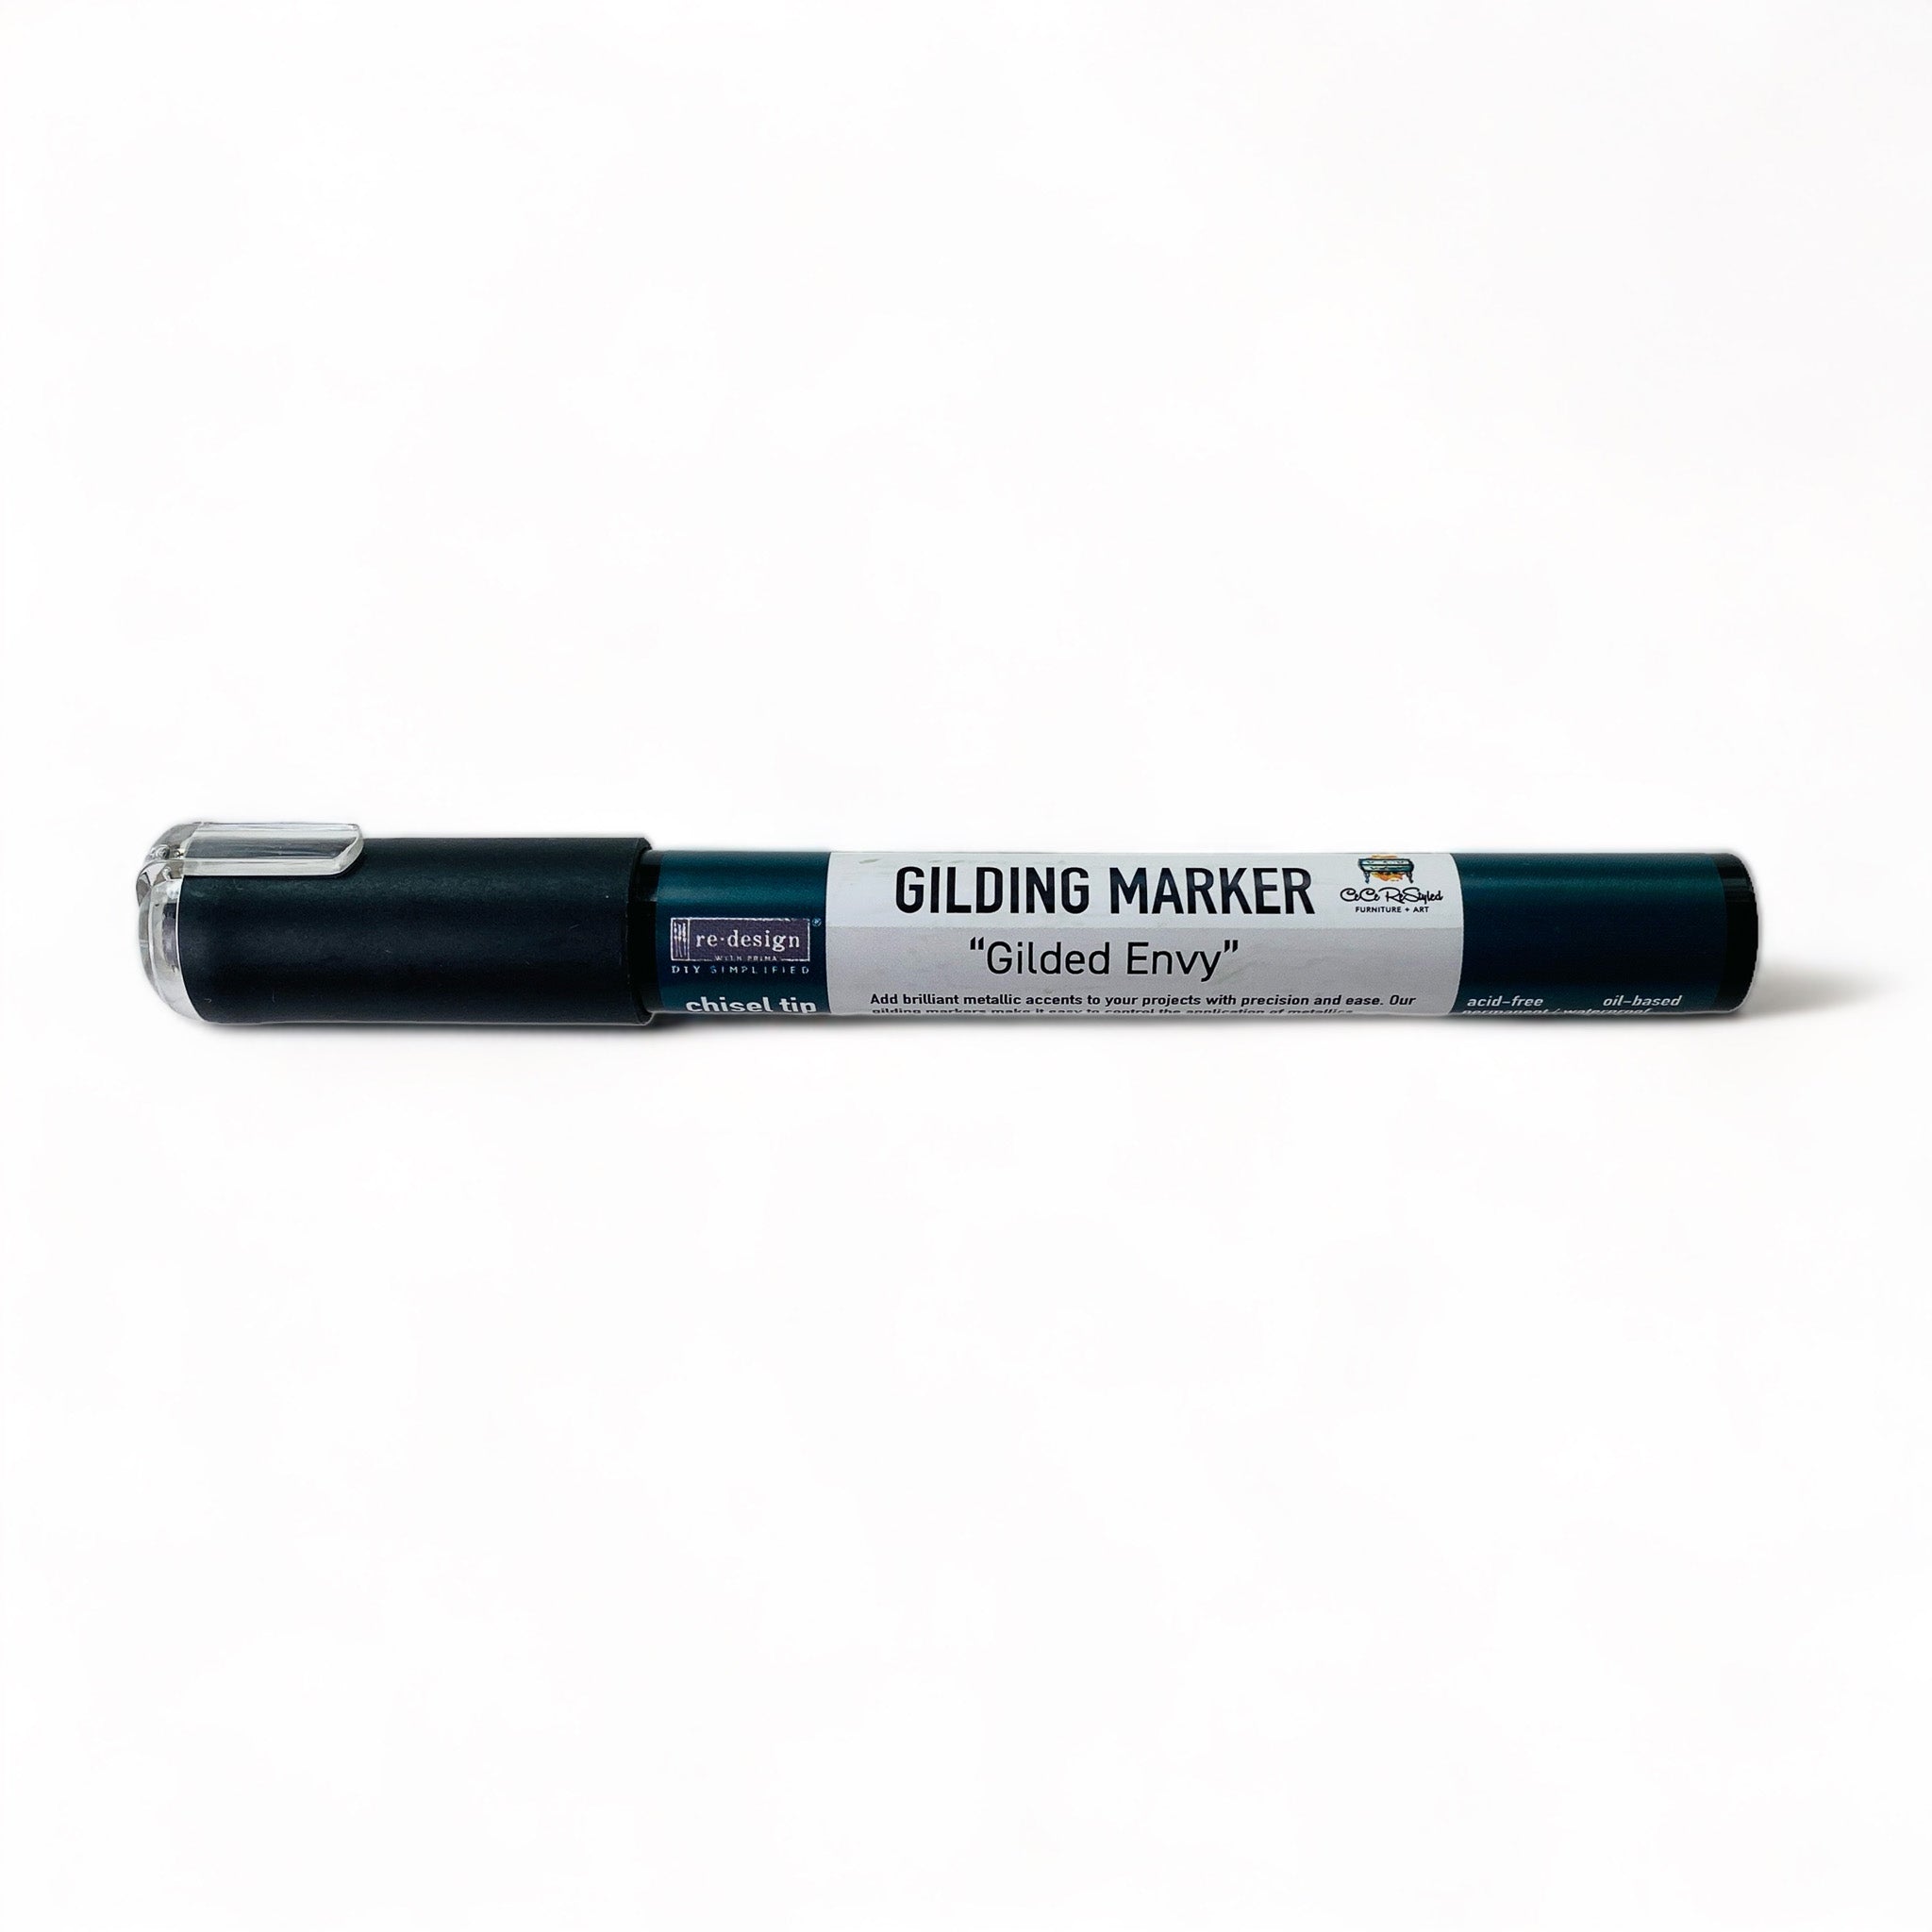 ReDesign with Prima's Gilded Envy Gilding Marker is against a white background. This is a gold metallic paint marker.